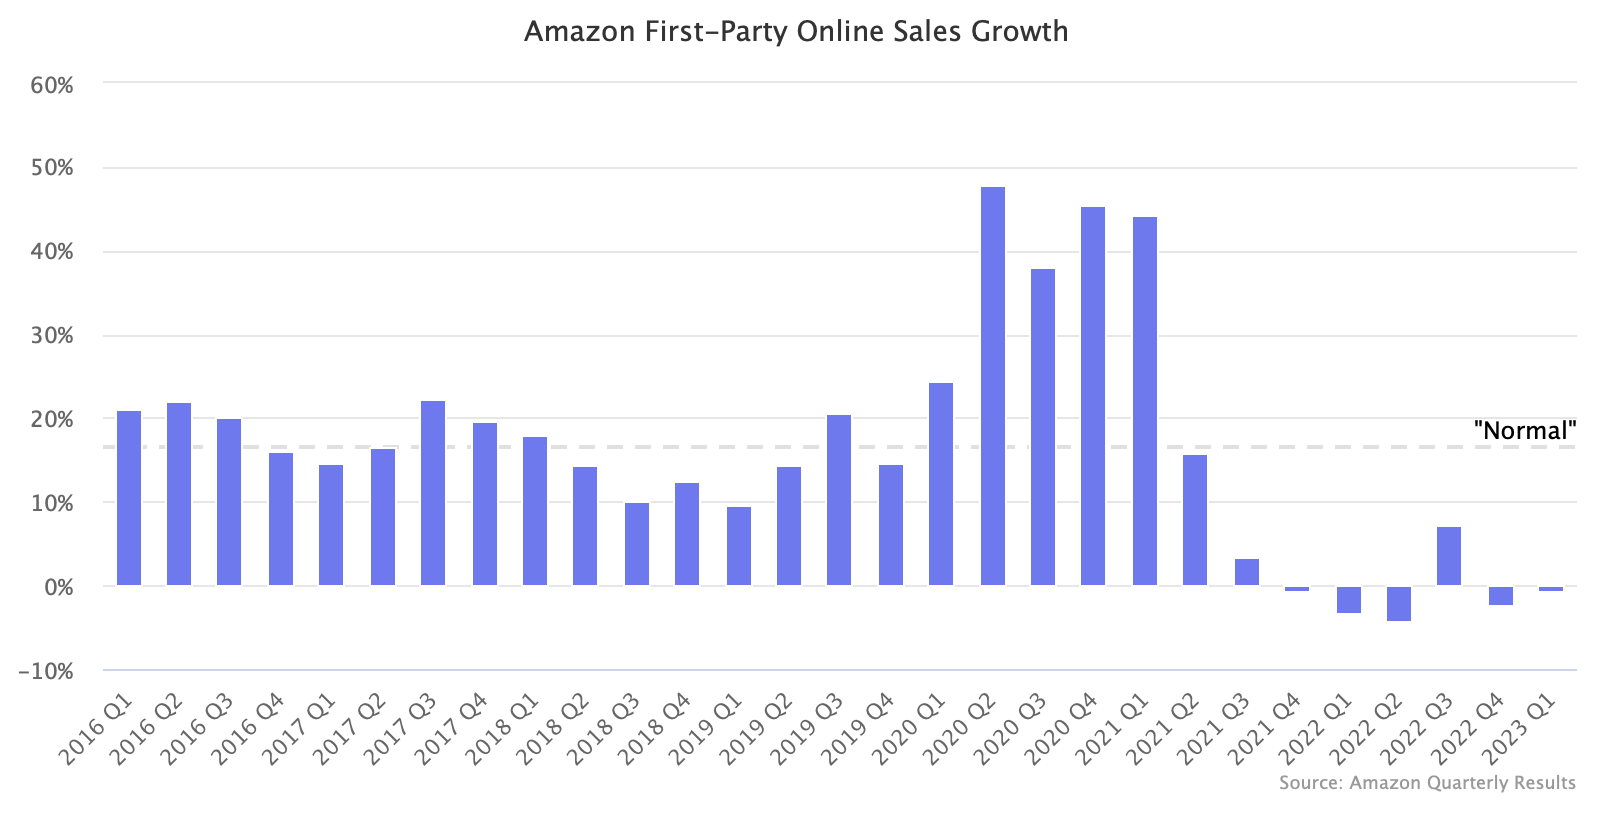 Amazon First-Party Online Sales Growth